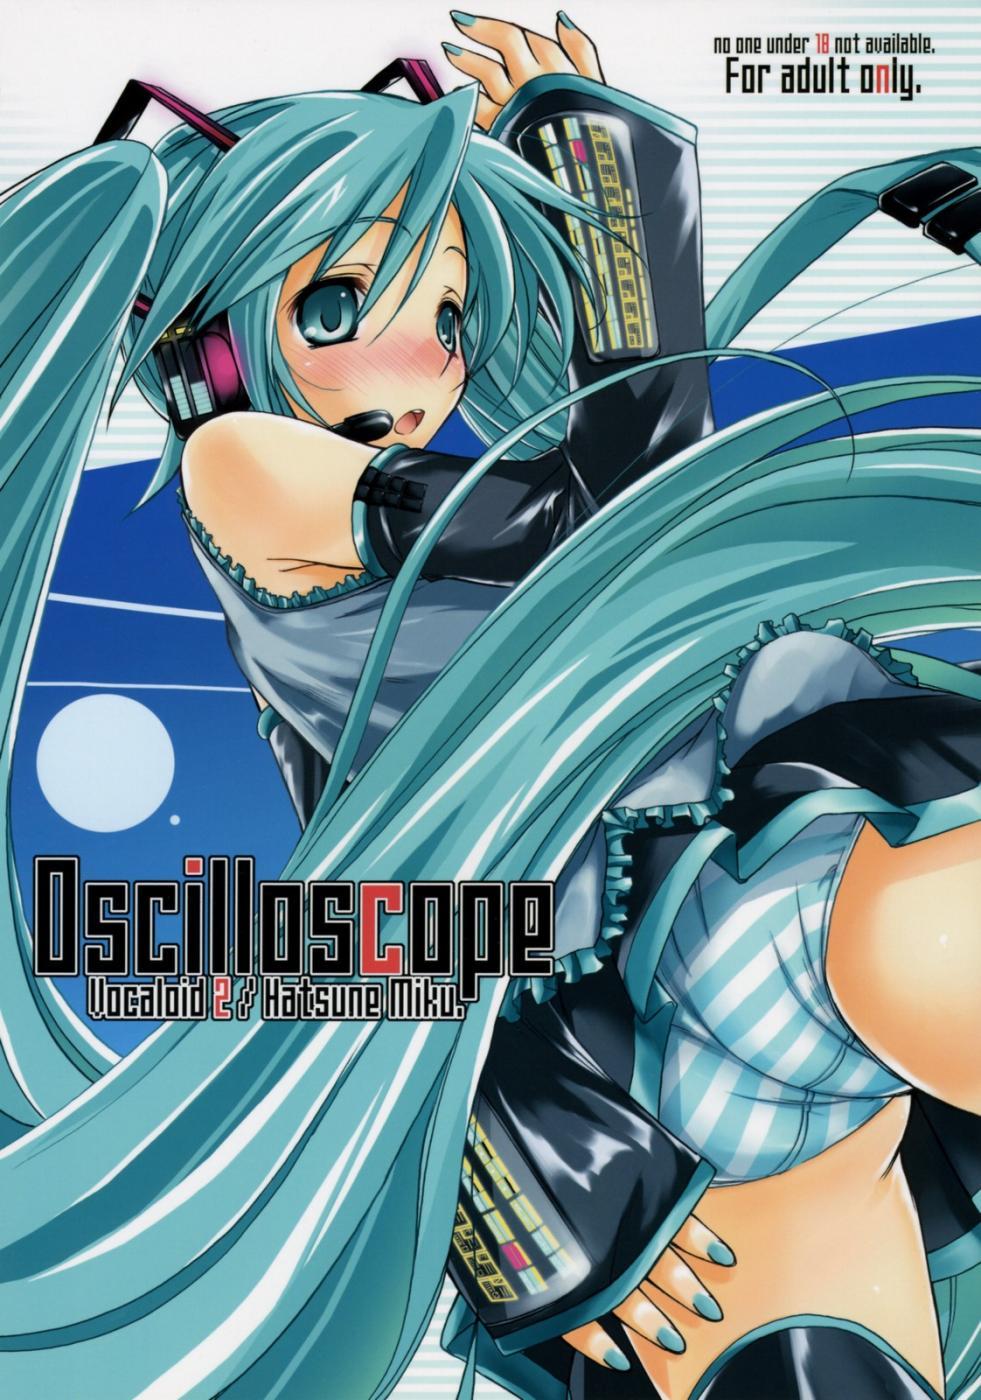 Leite Oscilloscope - Vocaloid Free 18 Year Old Porn - Page 1